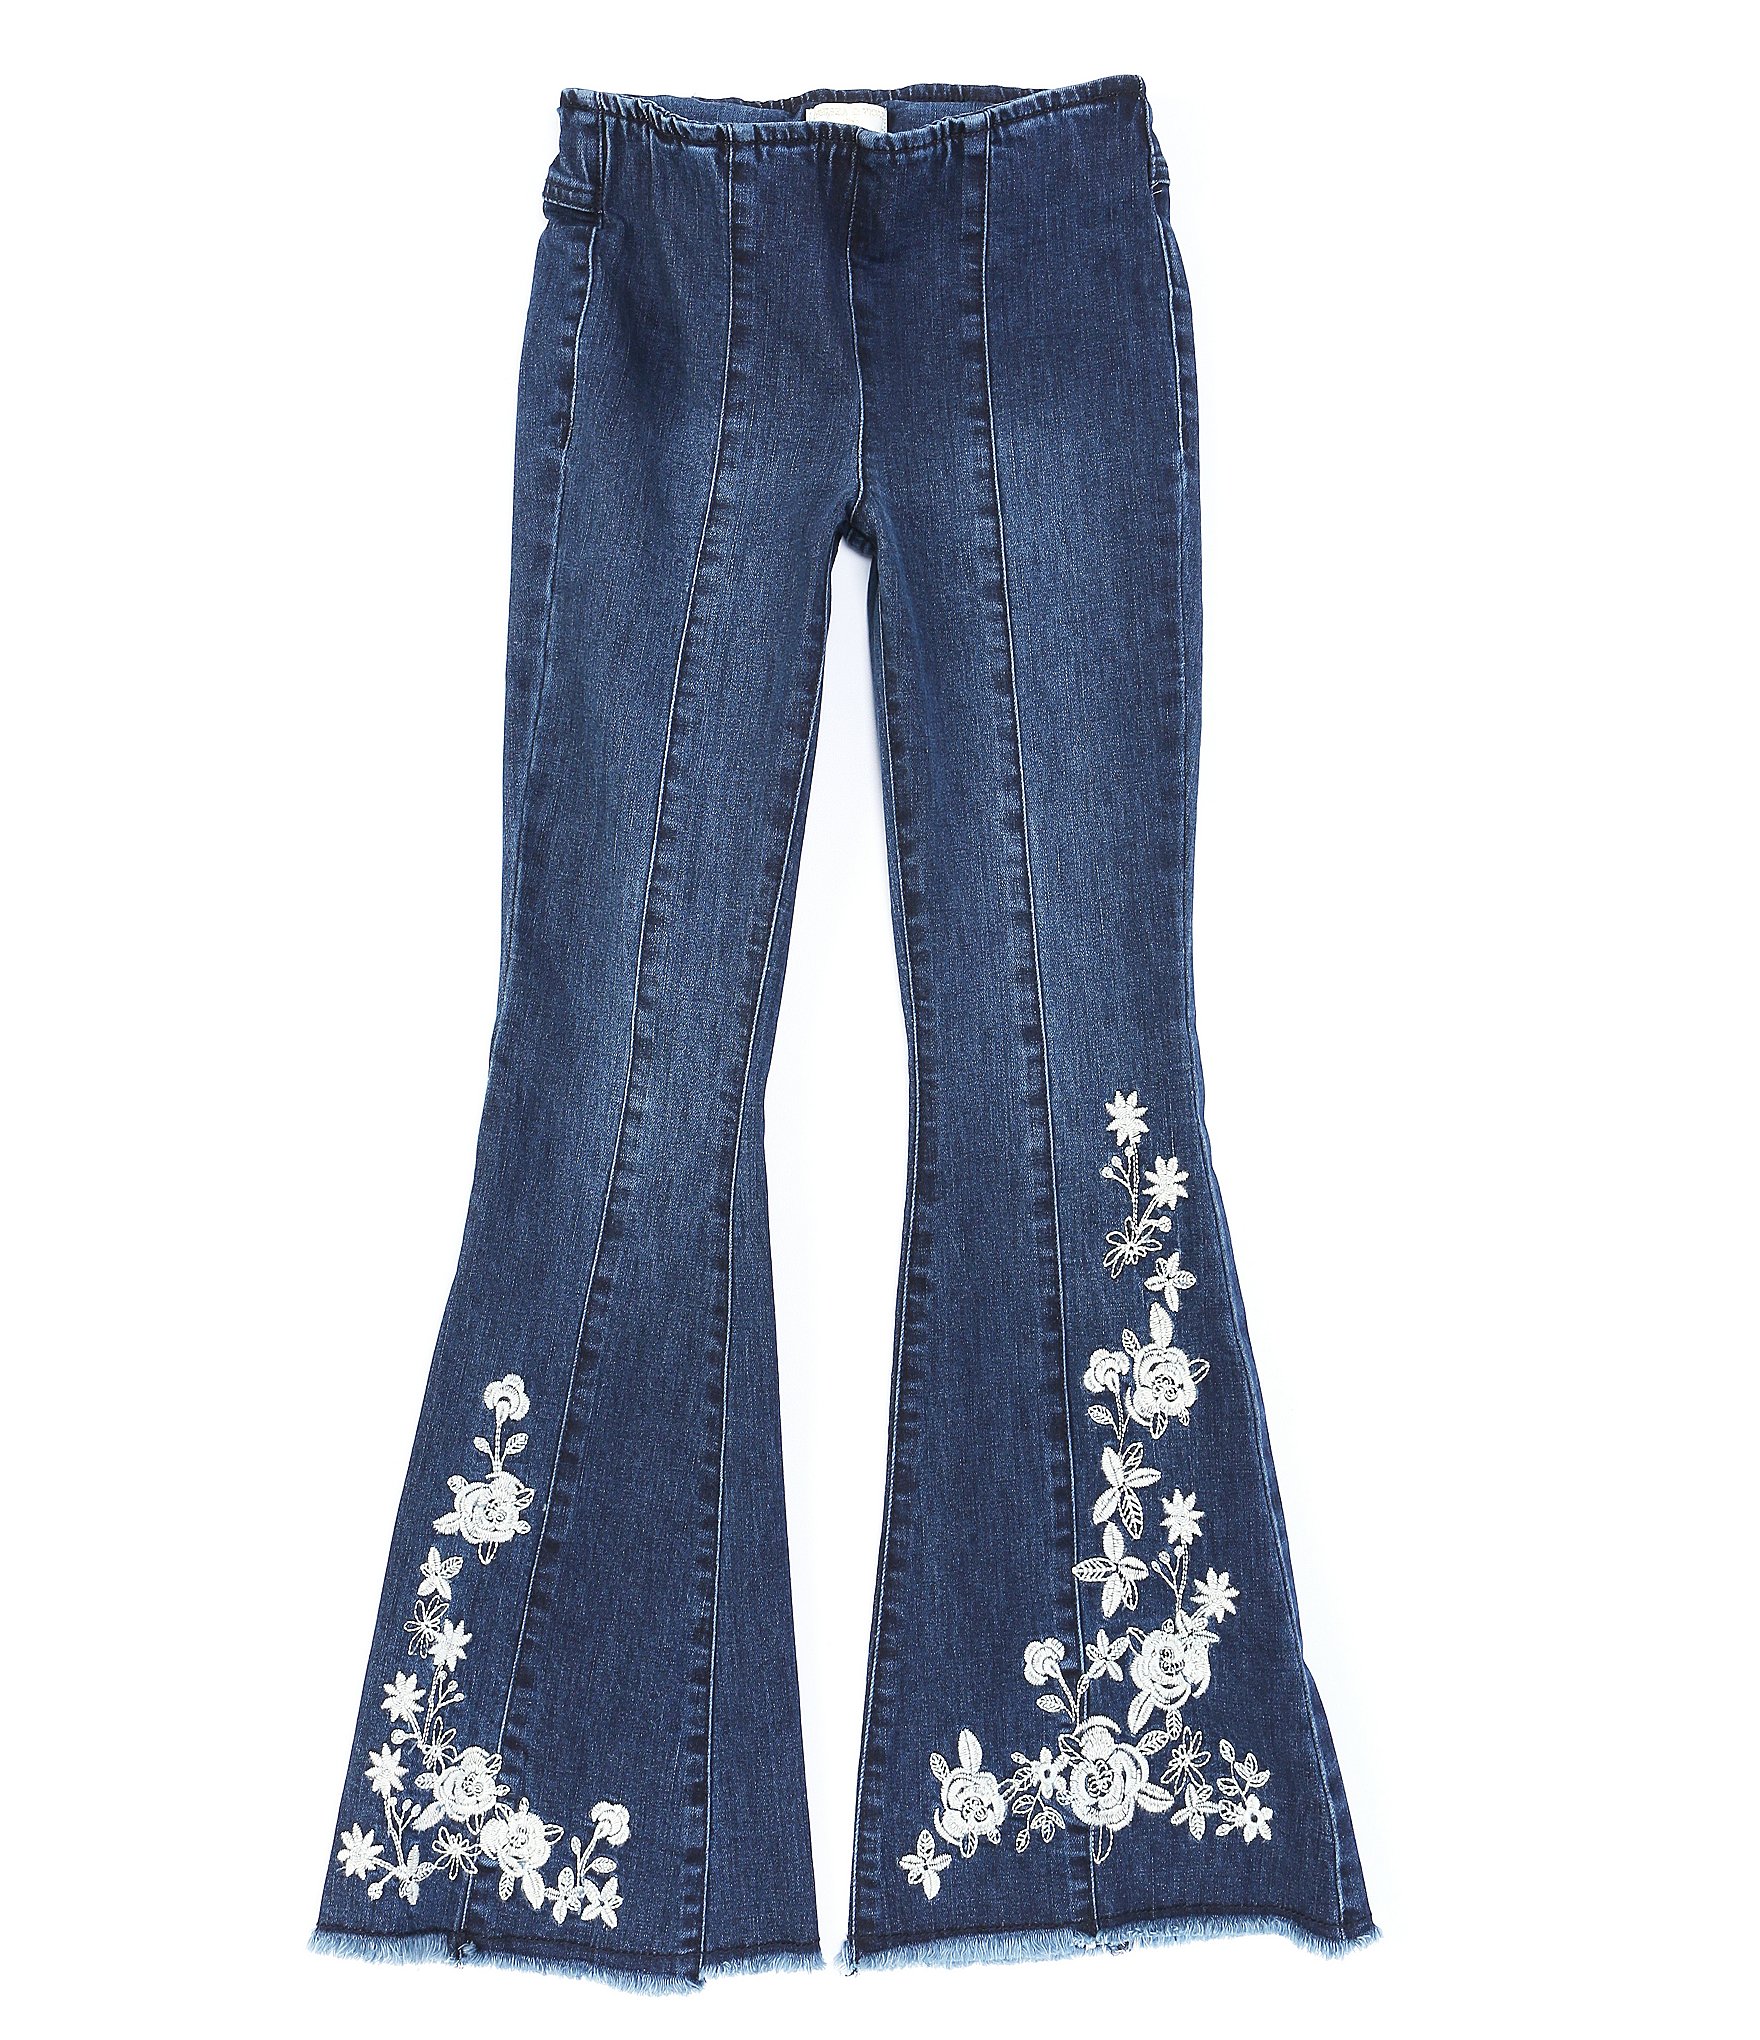 Embroidered Jeans - The Girl from Panama